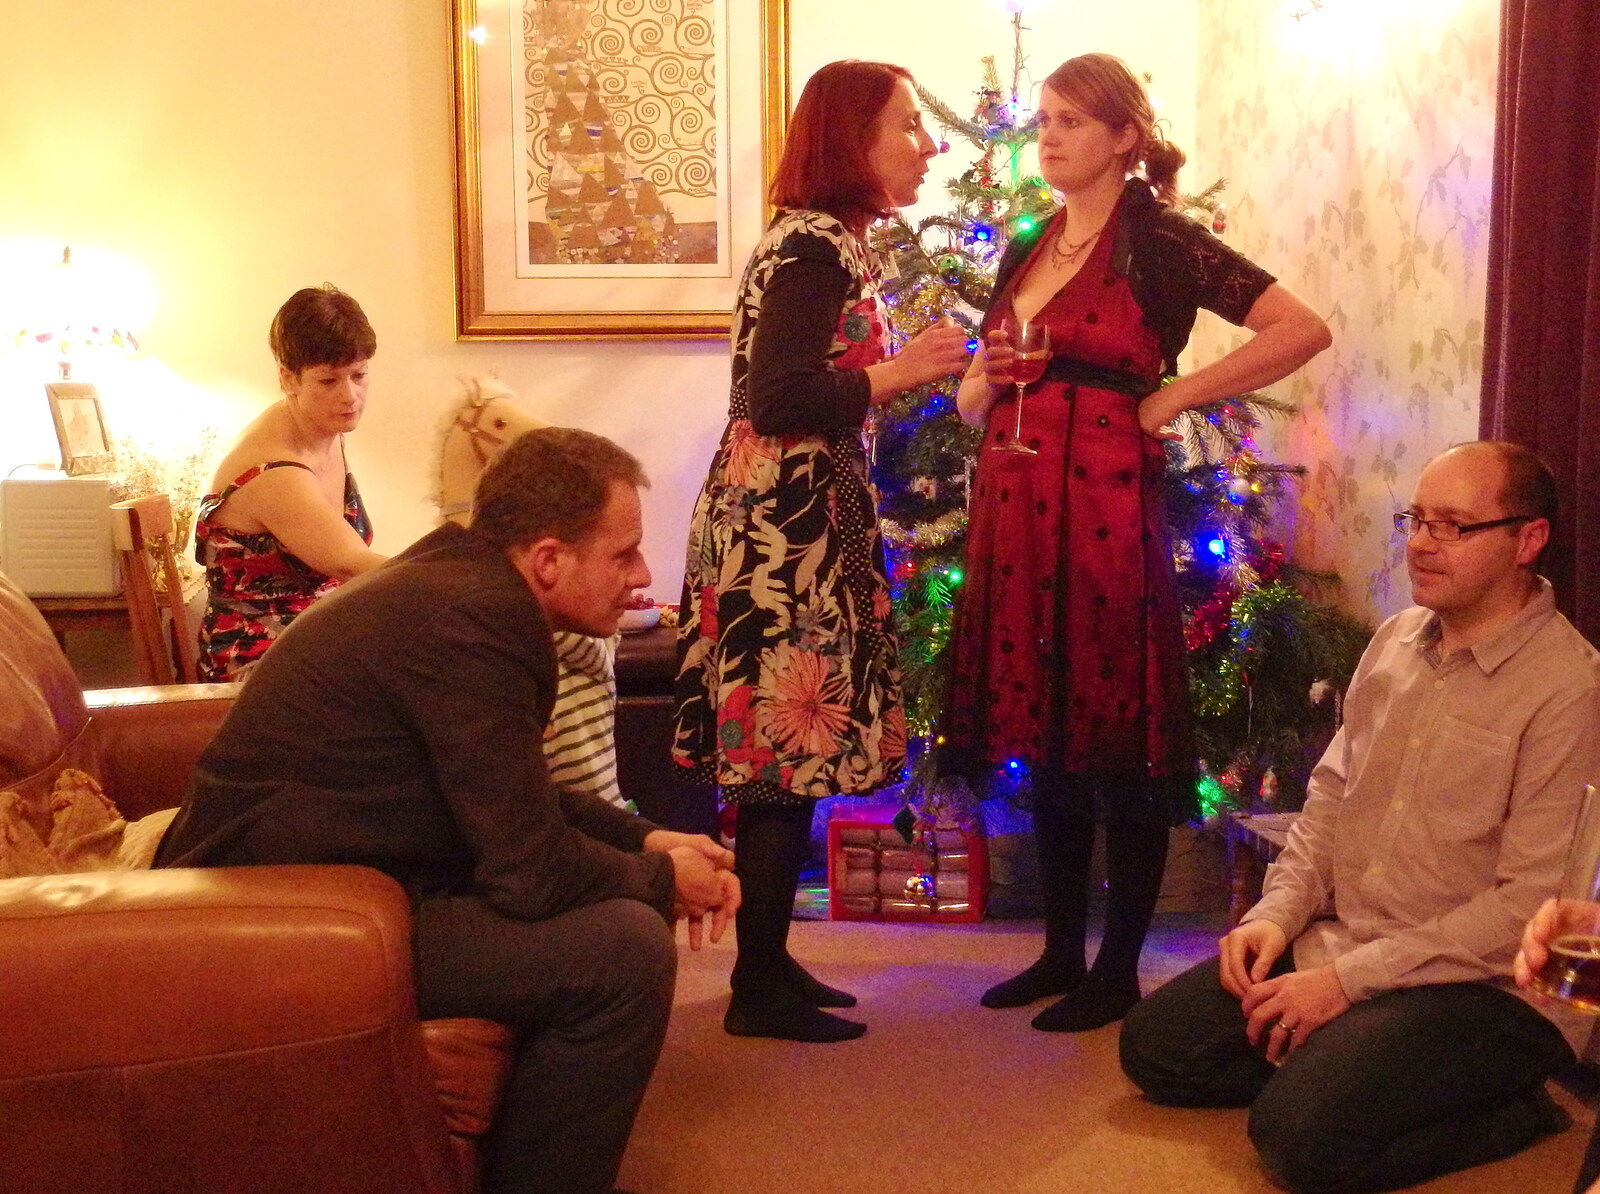 Sarah chats to Isobel from A Christmas Party, Brome, Suffolk - 21st December 2013